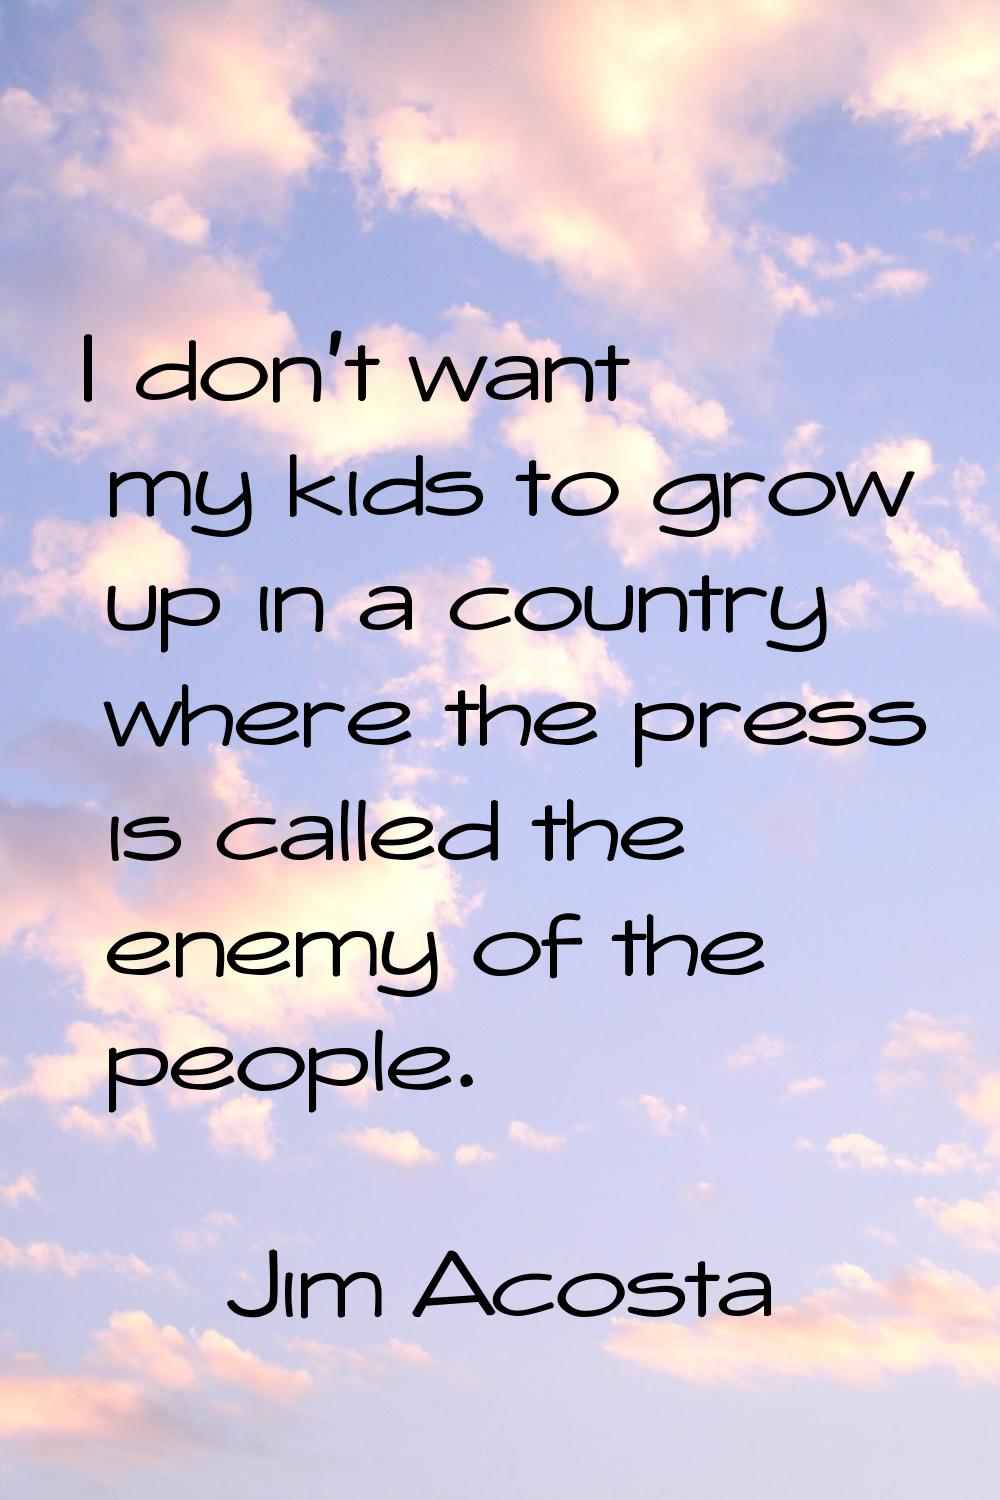 I don't want my kids to grow up in a country where the press is called the enemy of the people.